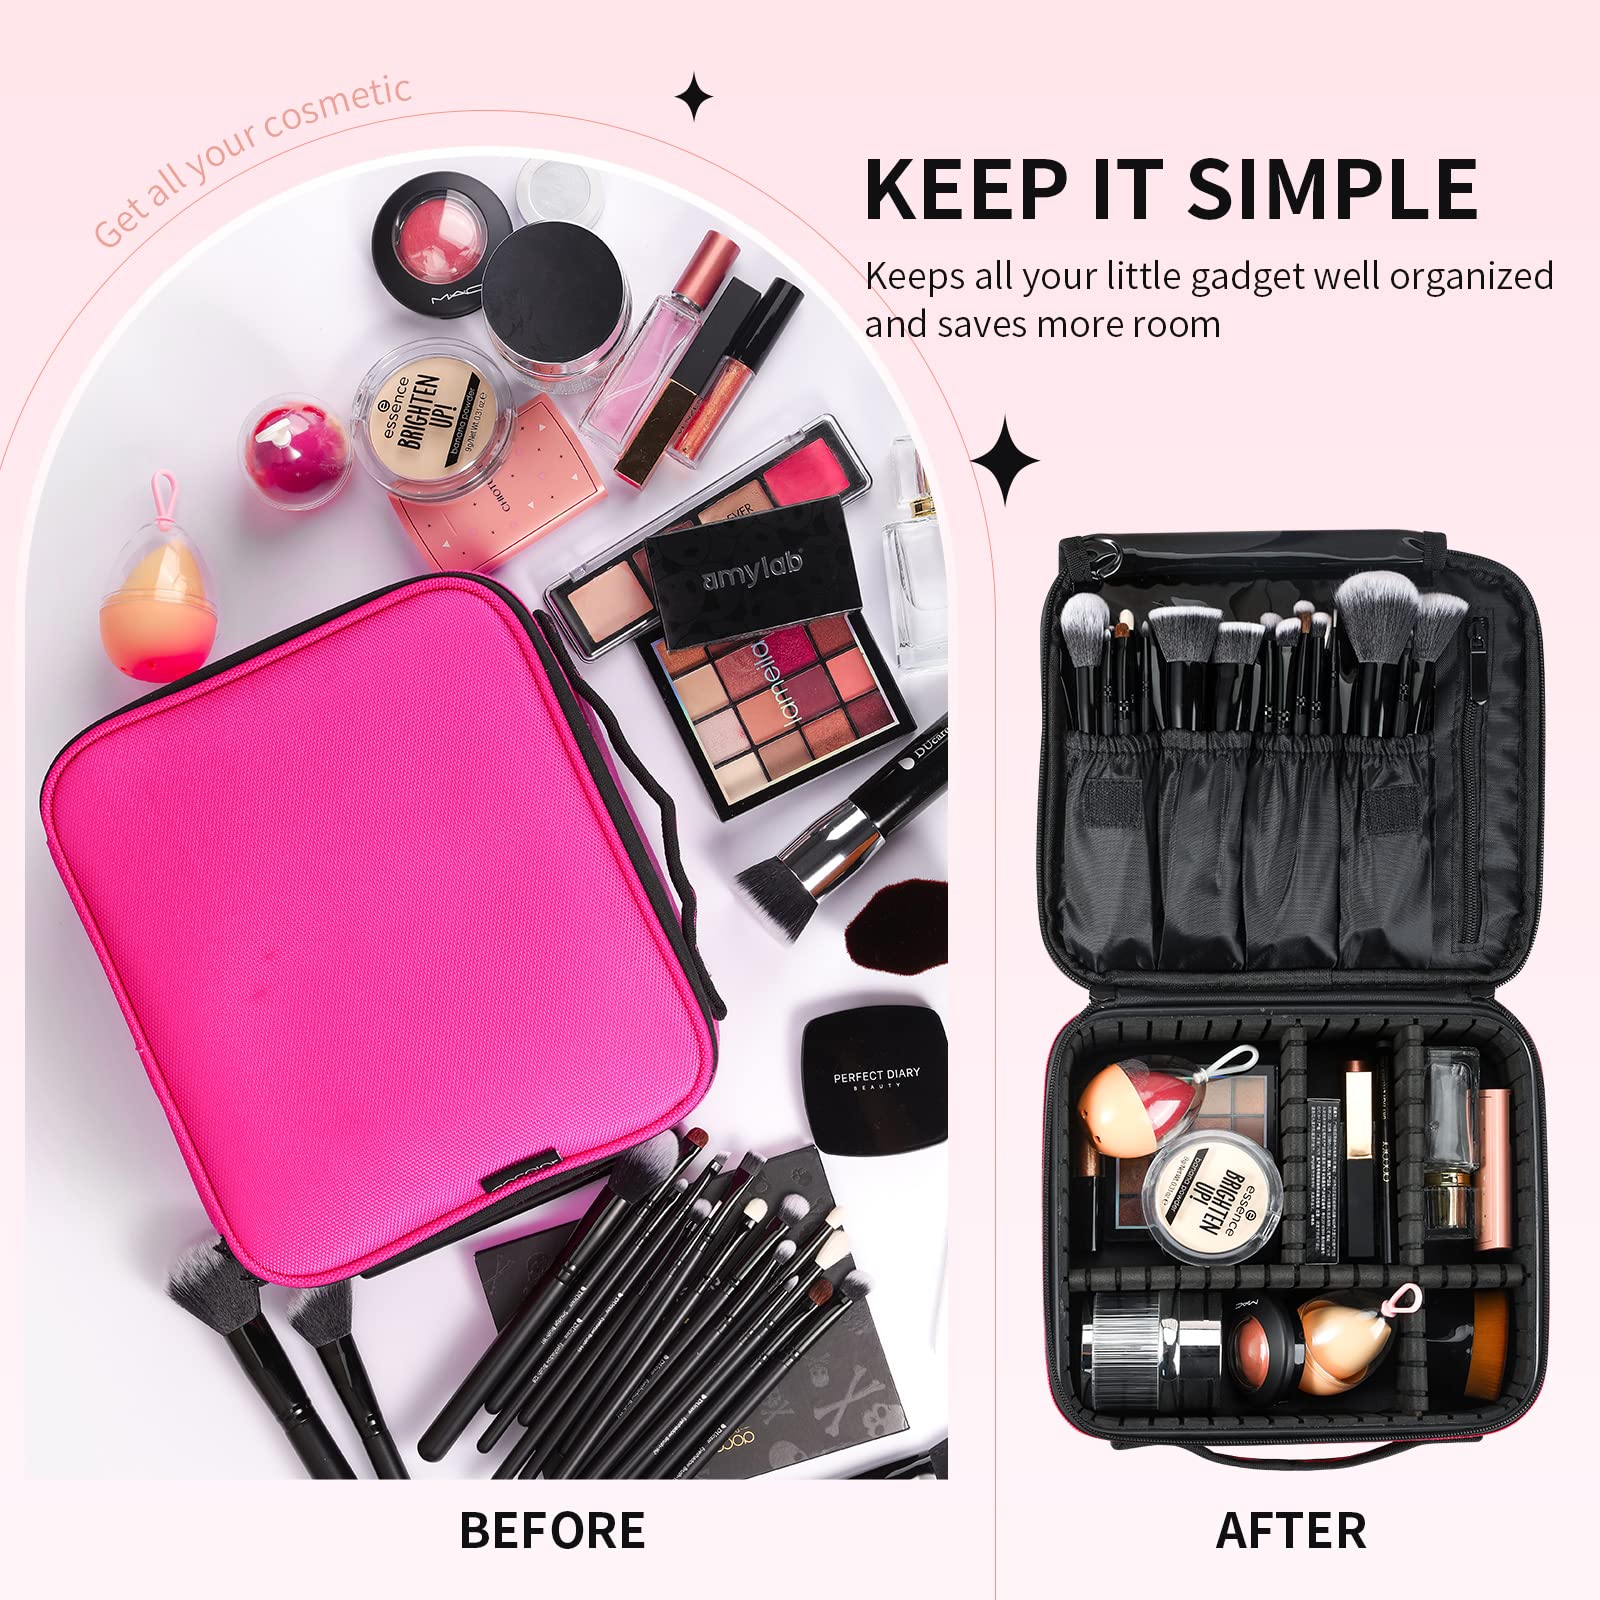 Docolor Travel Makeup Bag,Double Layer Portable Cosmetic Bag with Adjustable Dividers,Waterproof Makeup Case for Makeup Brushes,Travel Toiletry Bag for Women Cosmetics Accessories Tools Case